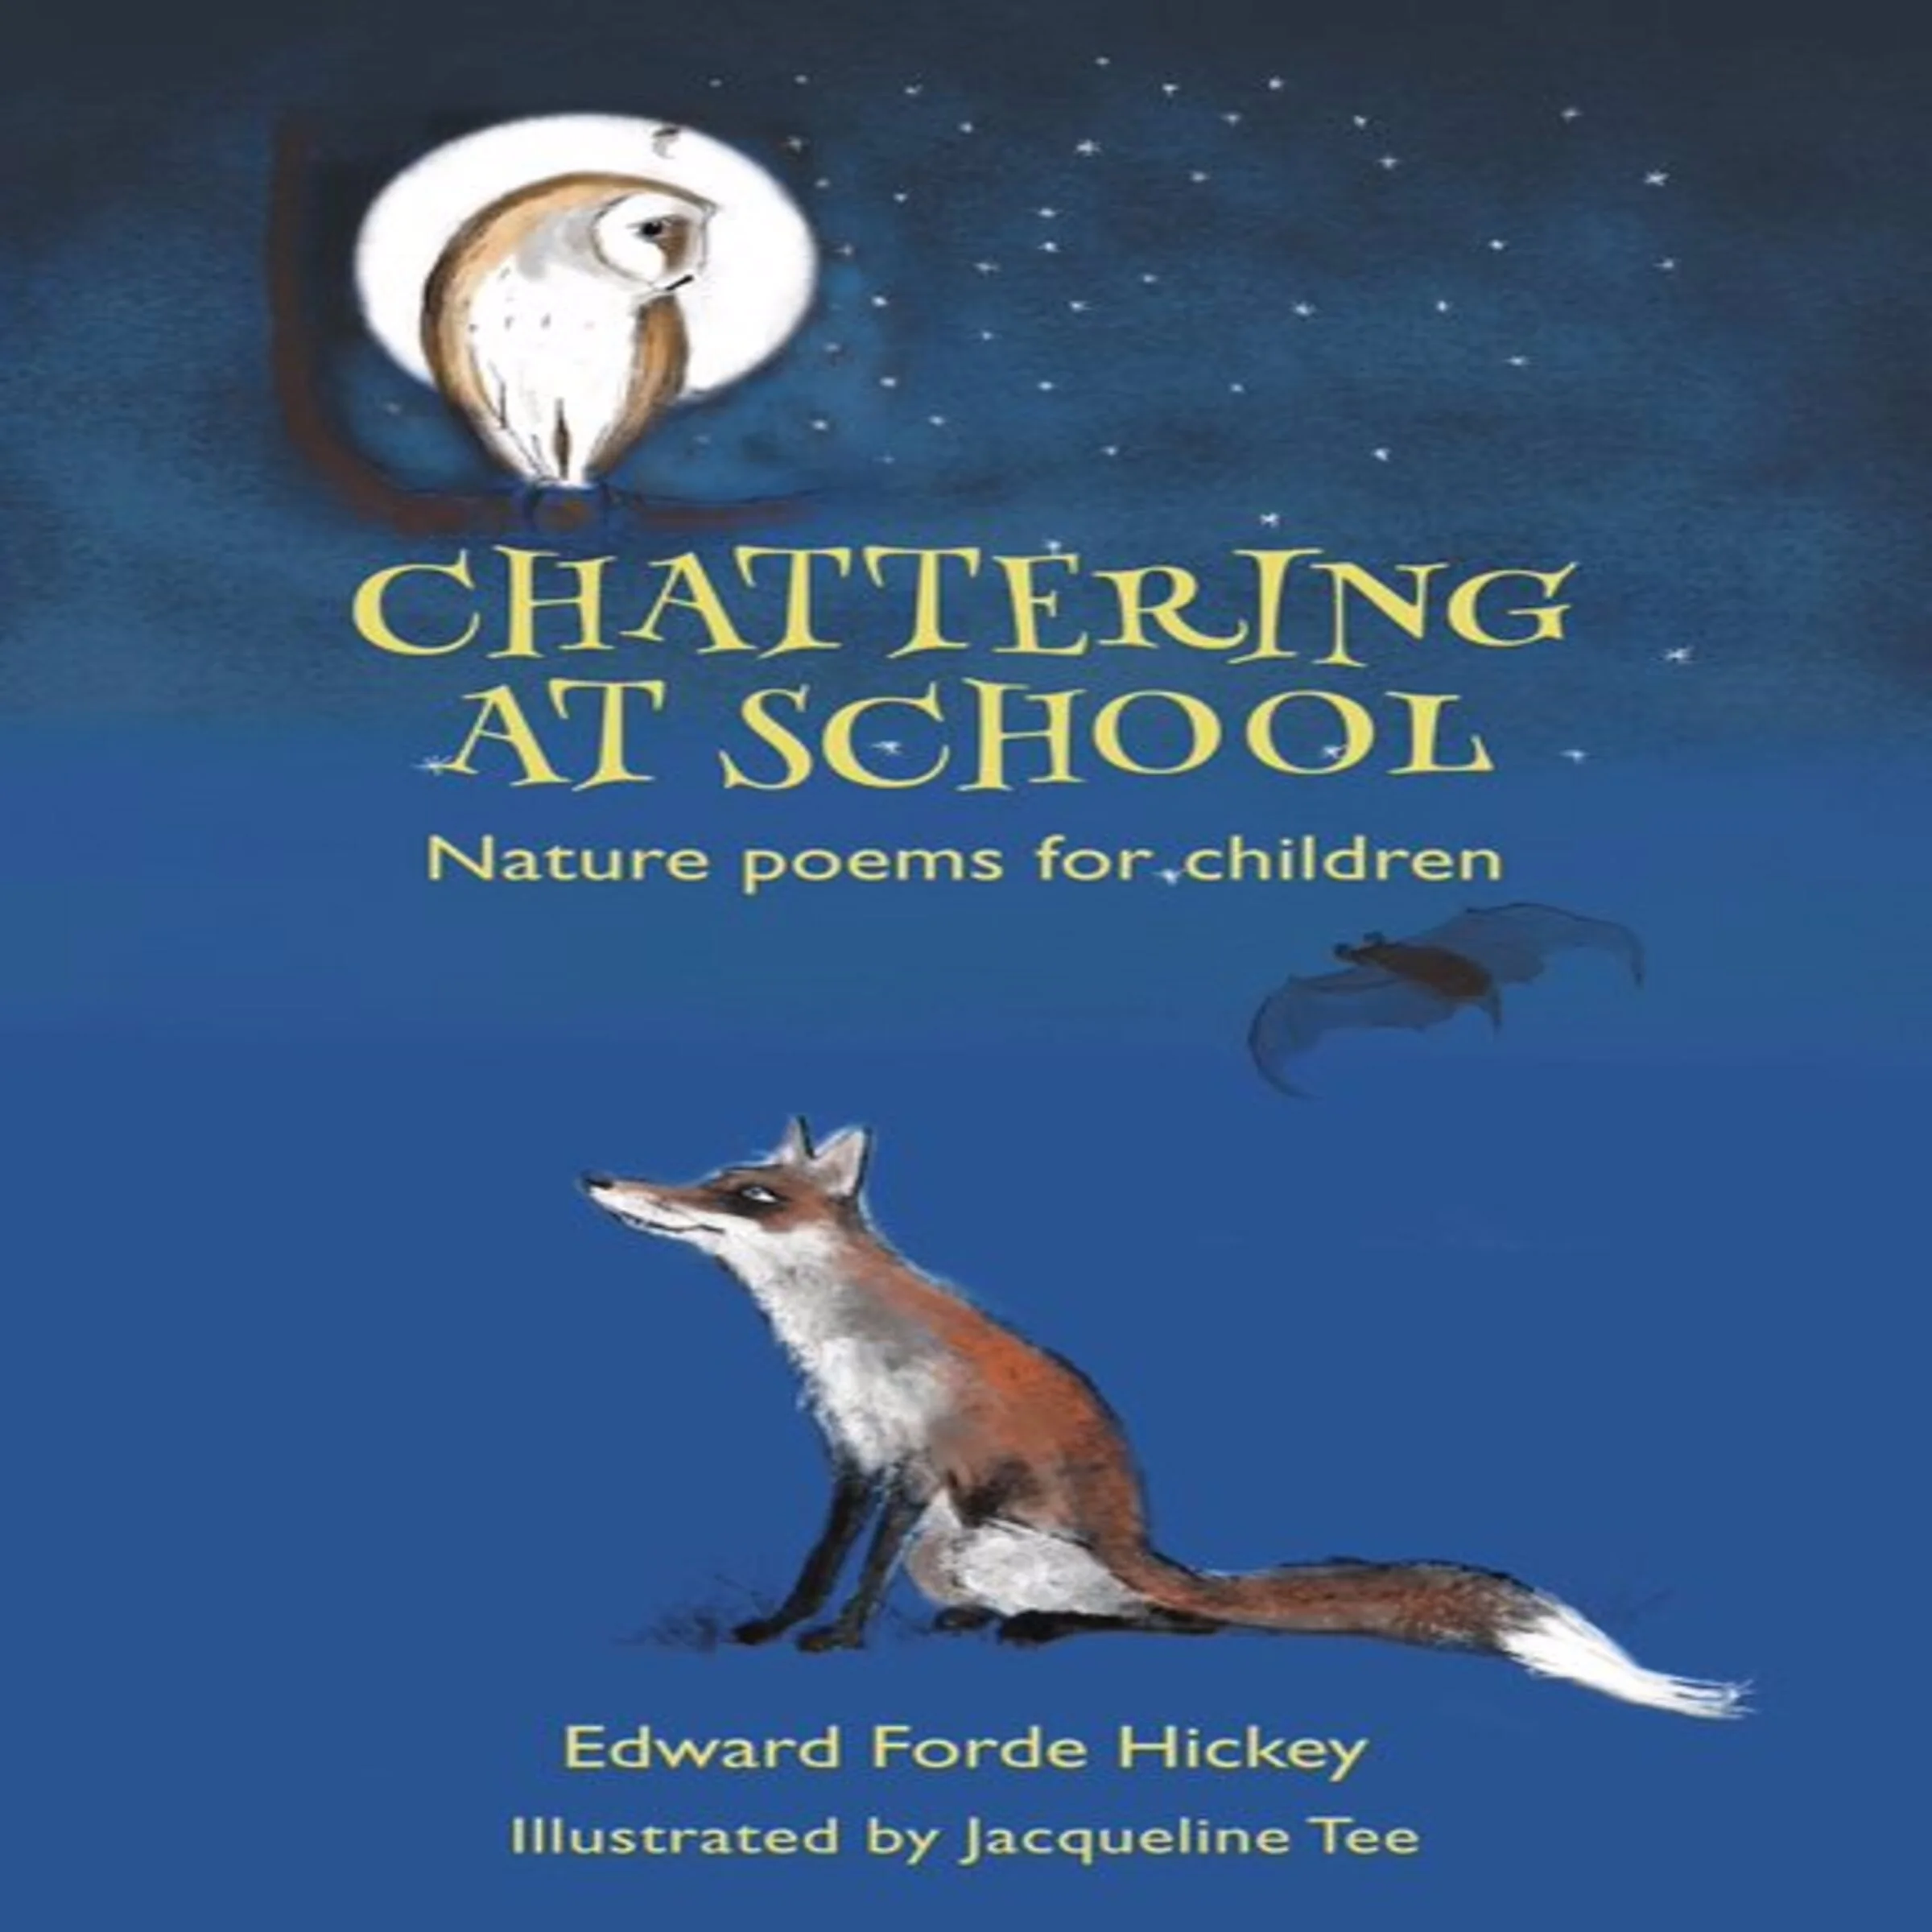 Chattering at School:  Nature poems for children by Edward Forde Hickey Audiobook